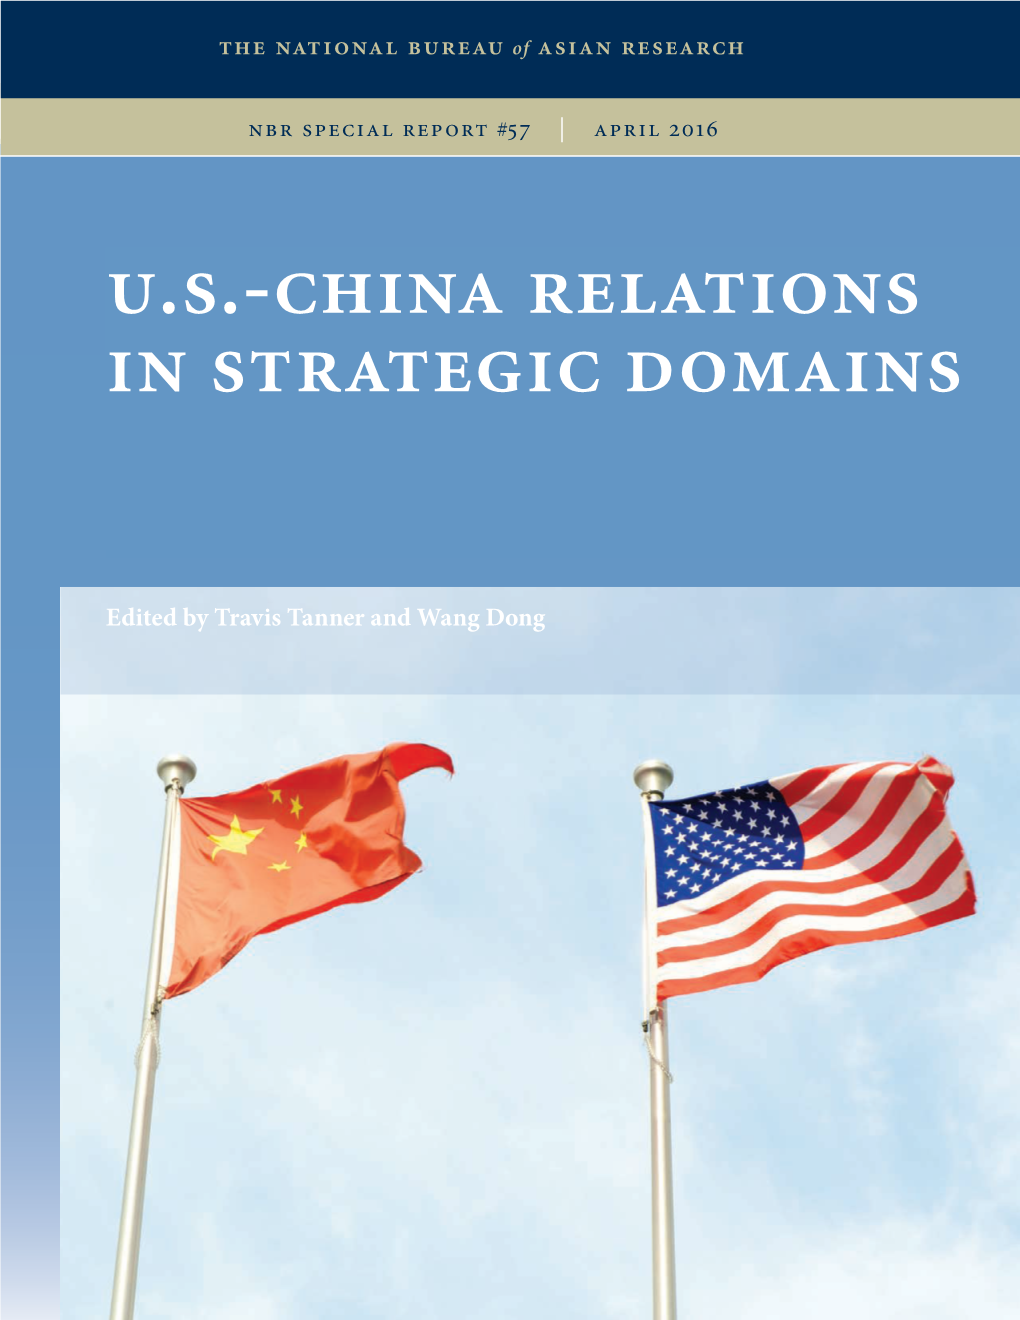 U.S.-China Relations in Strategic Domains